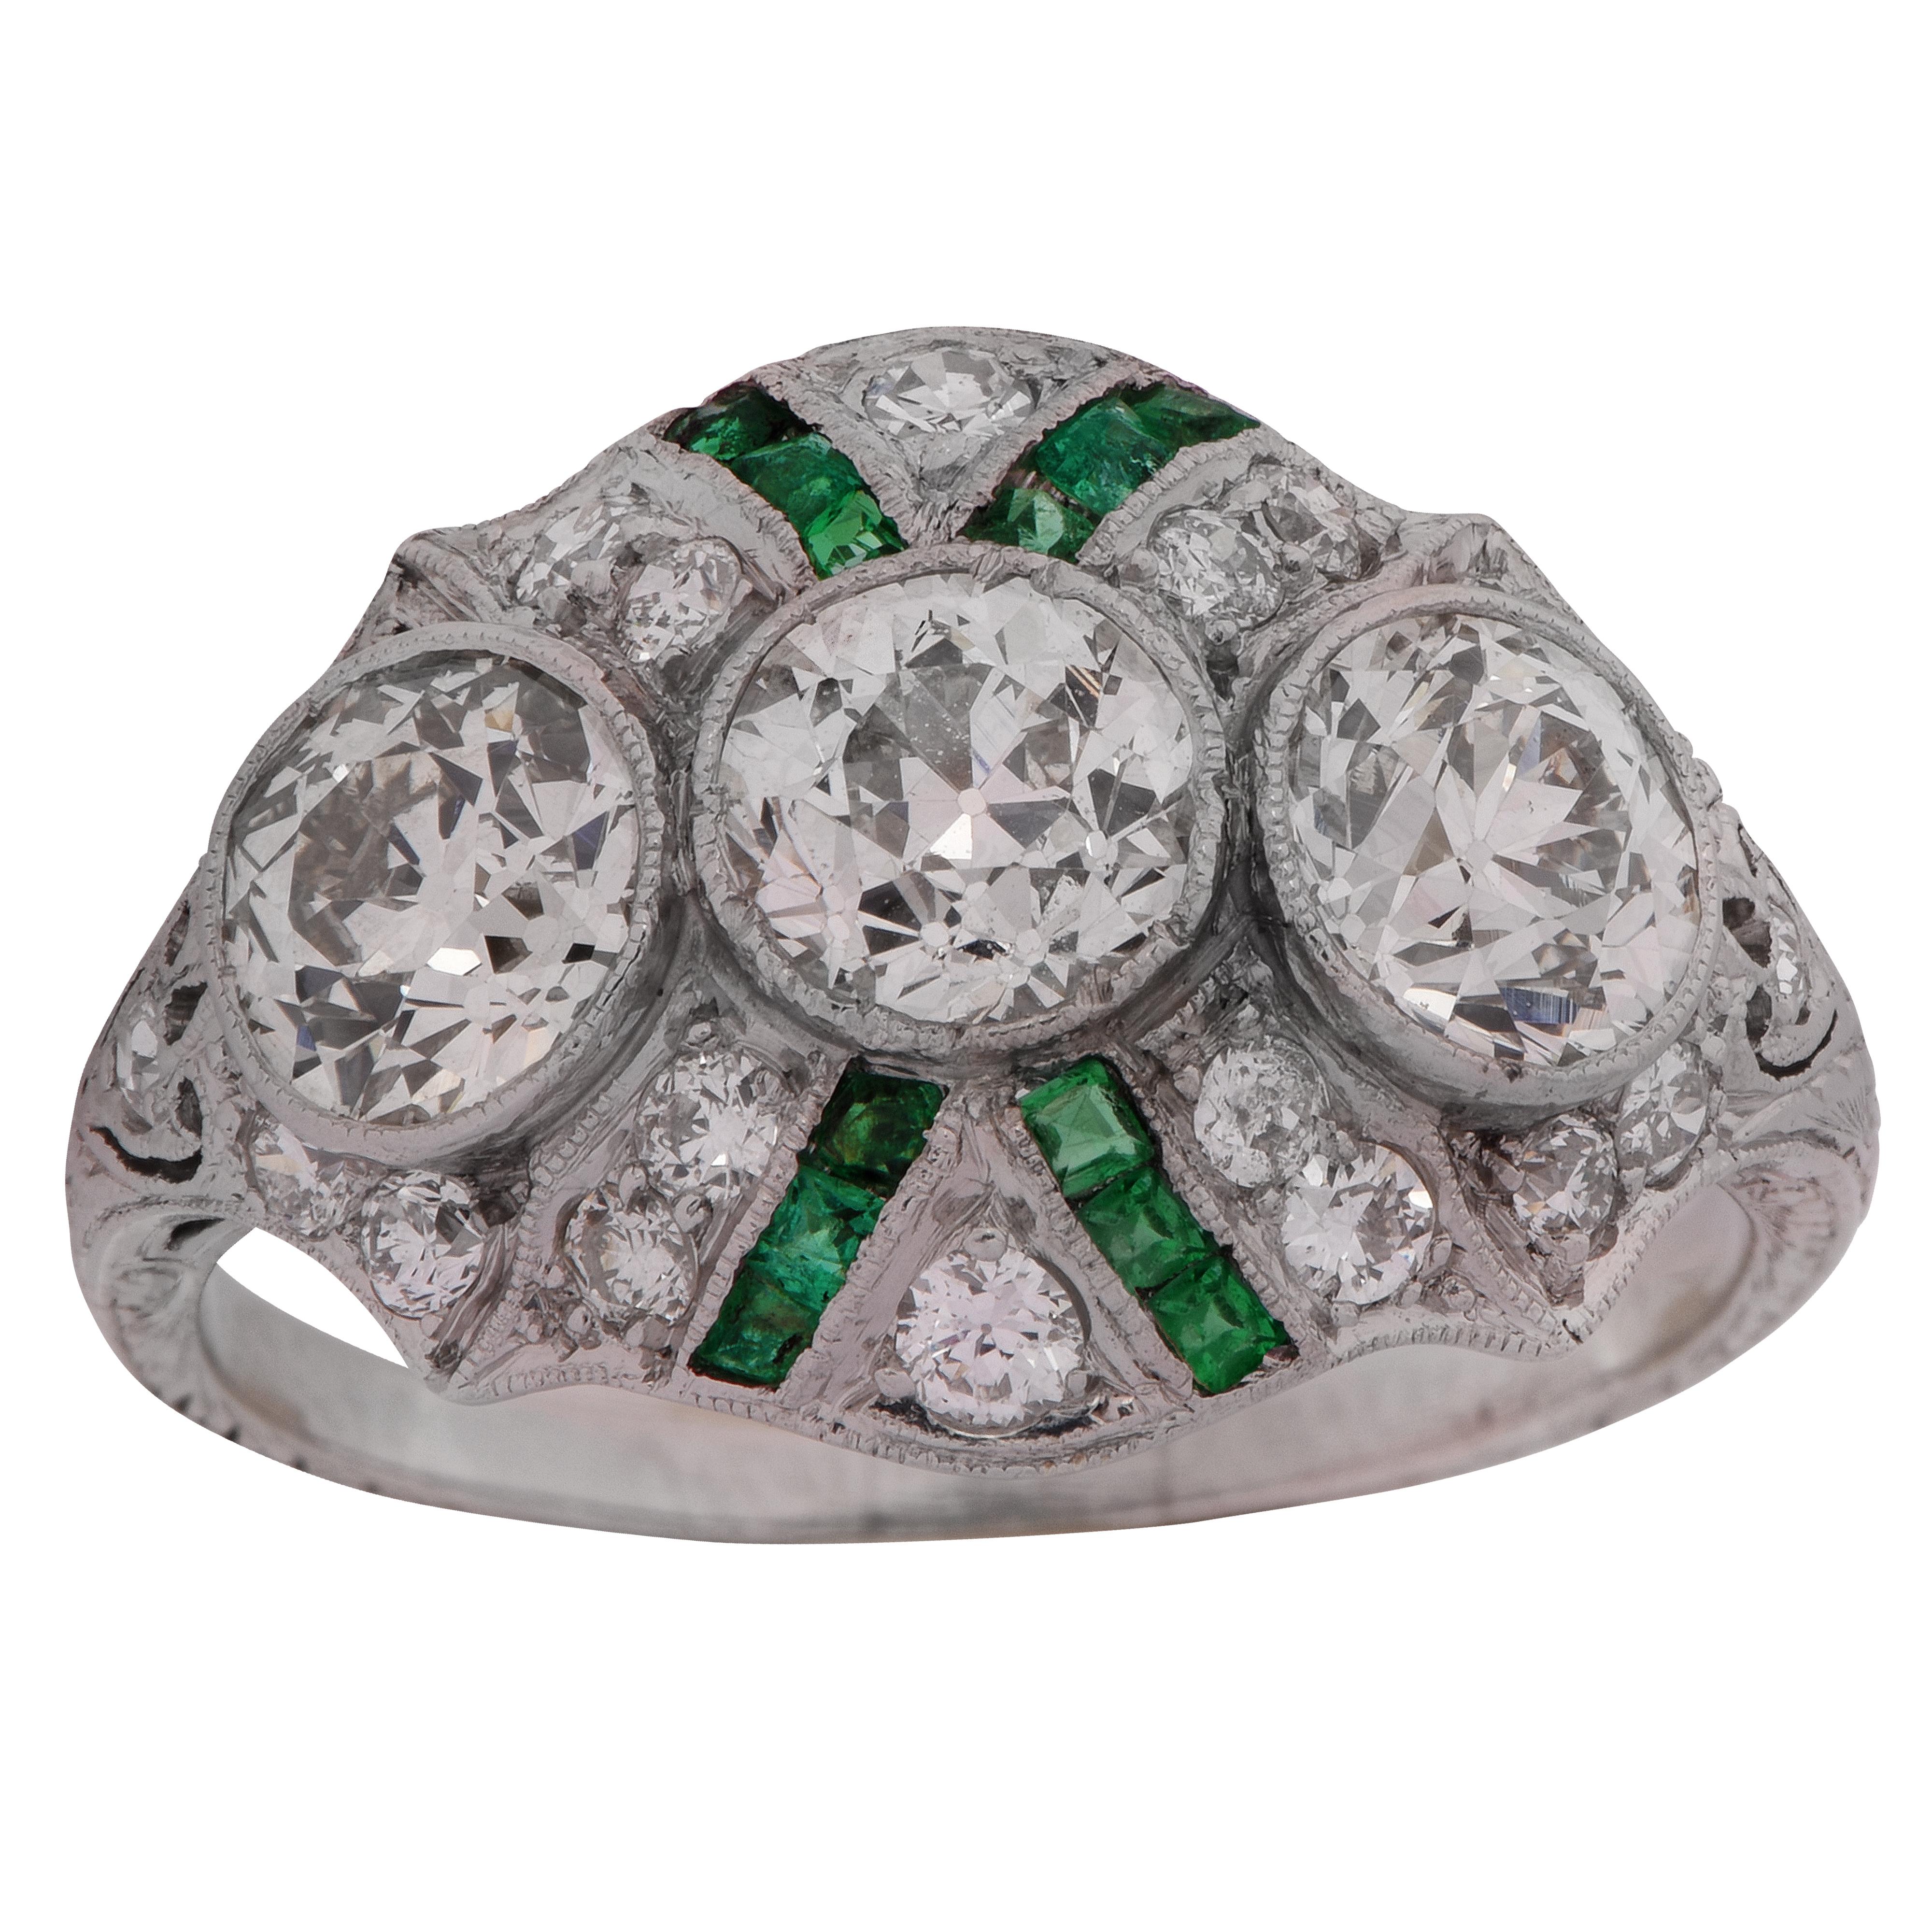 Stunning Edwardian ring, finely crafted in Platinum, showcasing 3 gorgeous European cut diamonds I-J color, VS clarity, weighing approximately 2.20 carats total, framed in milgrain, and accented by .50 carats of single cut and European cut diamonds.